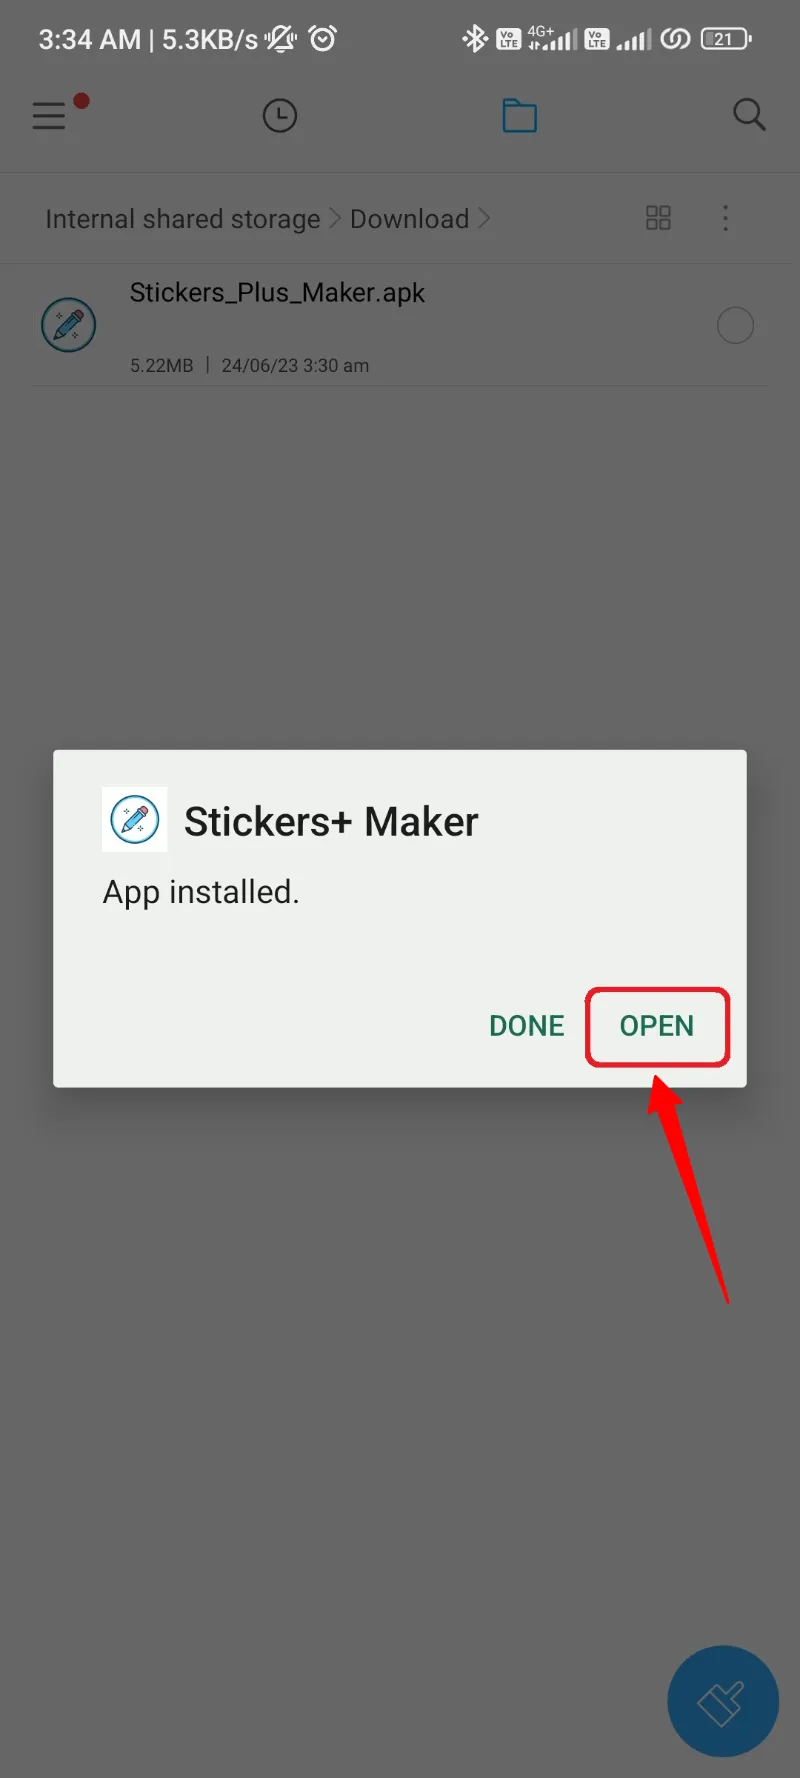 Stickers Plus Maker APK Installation Completed